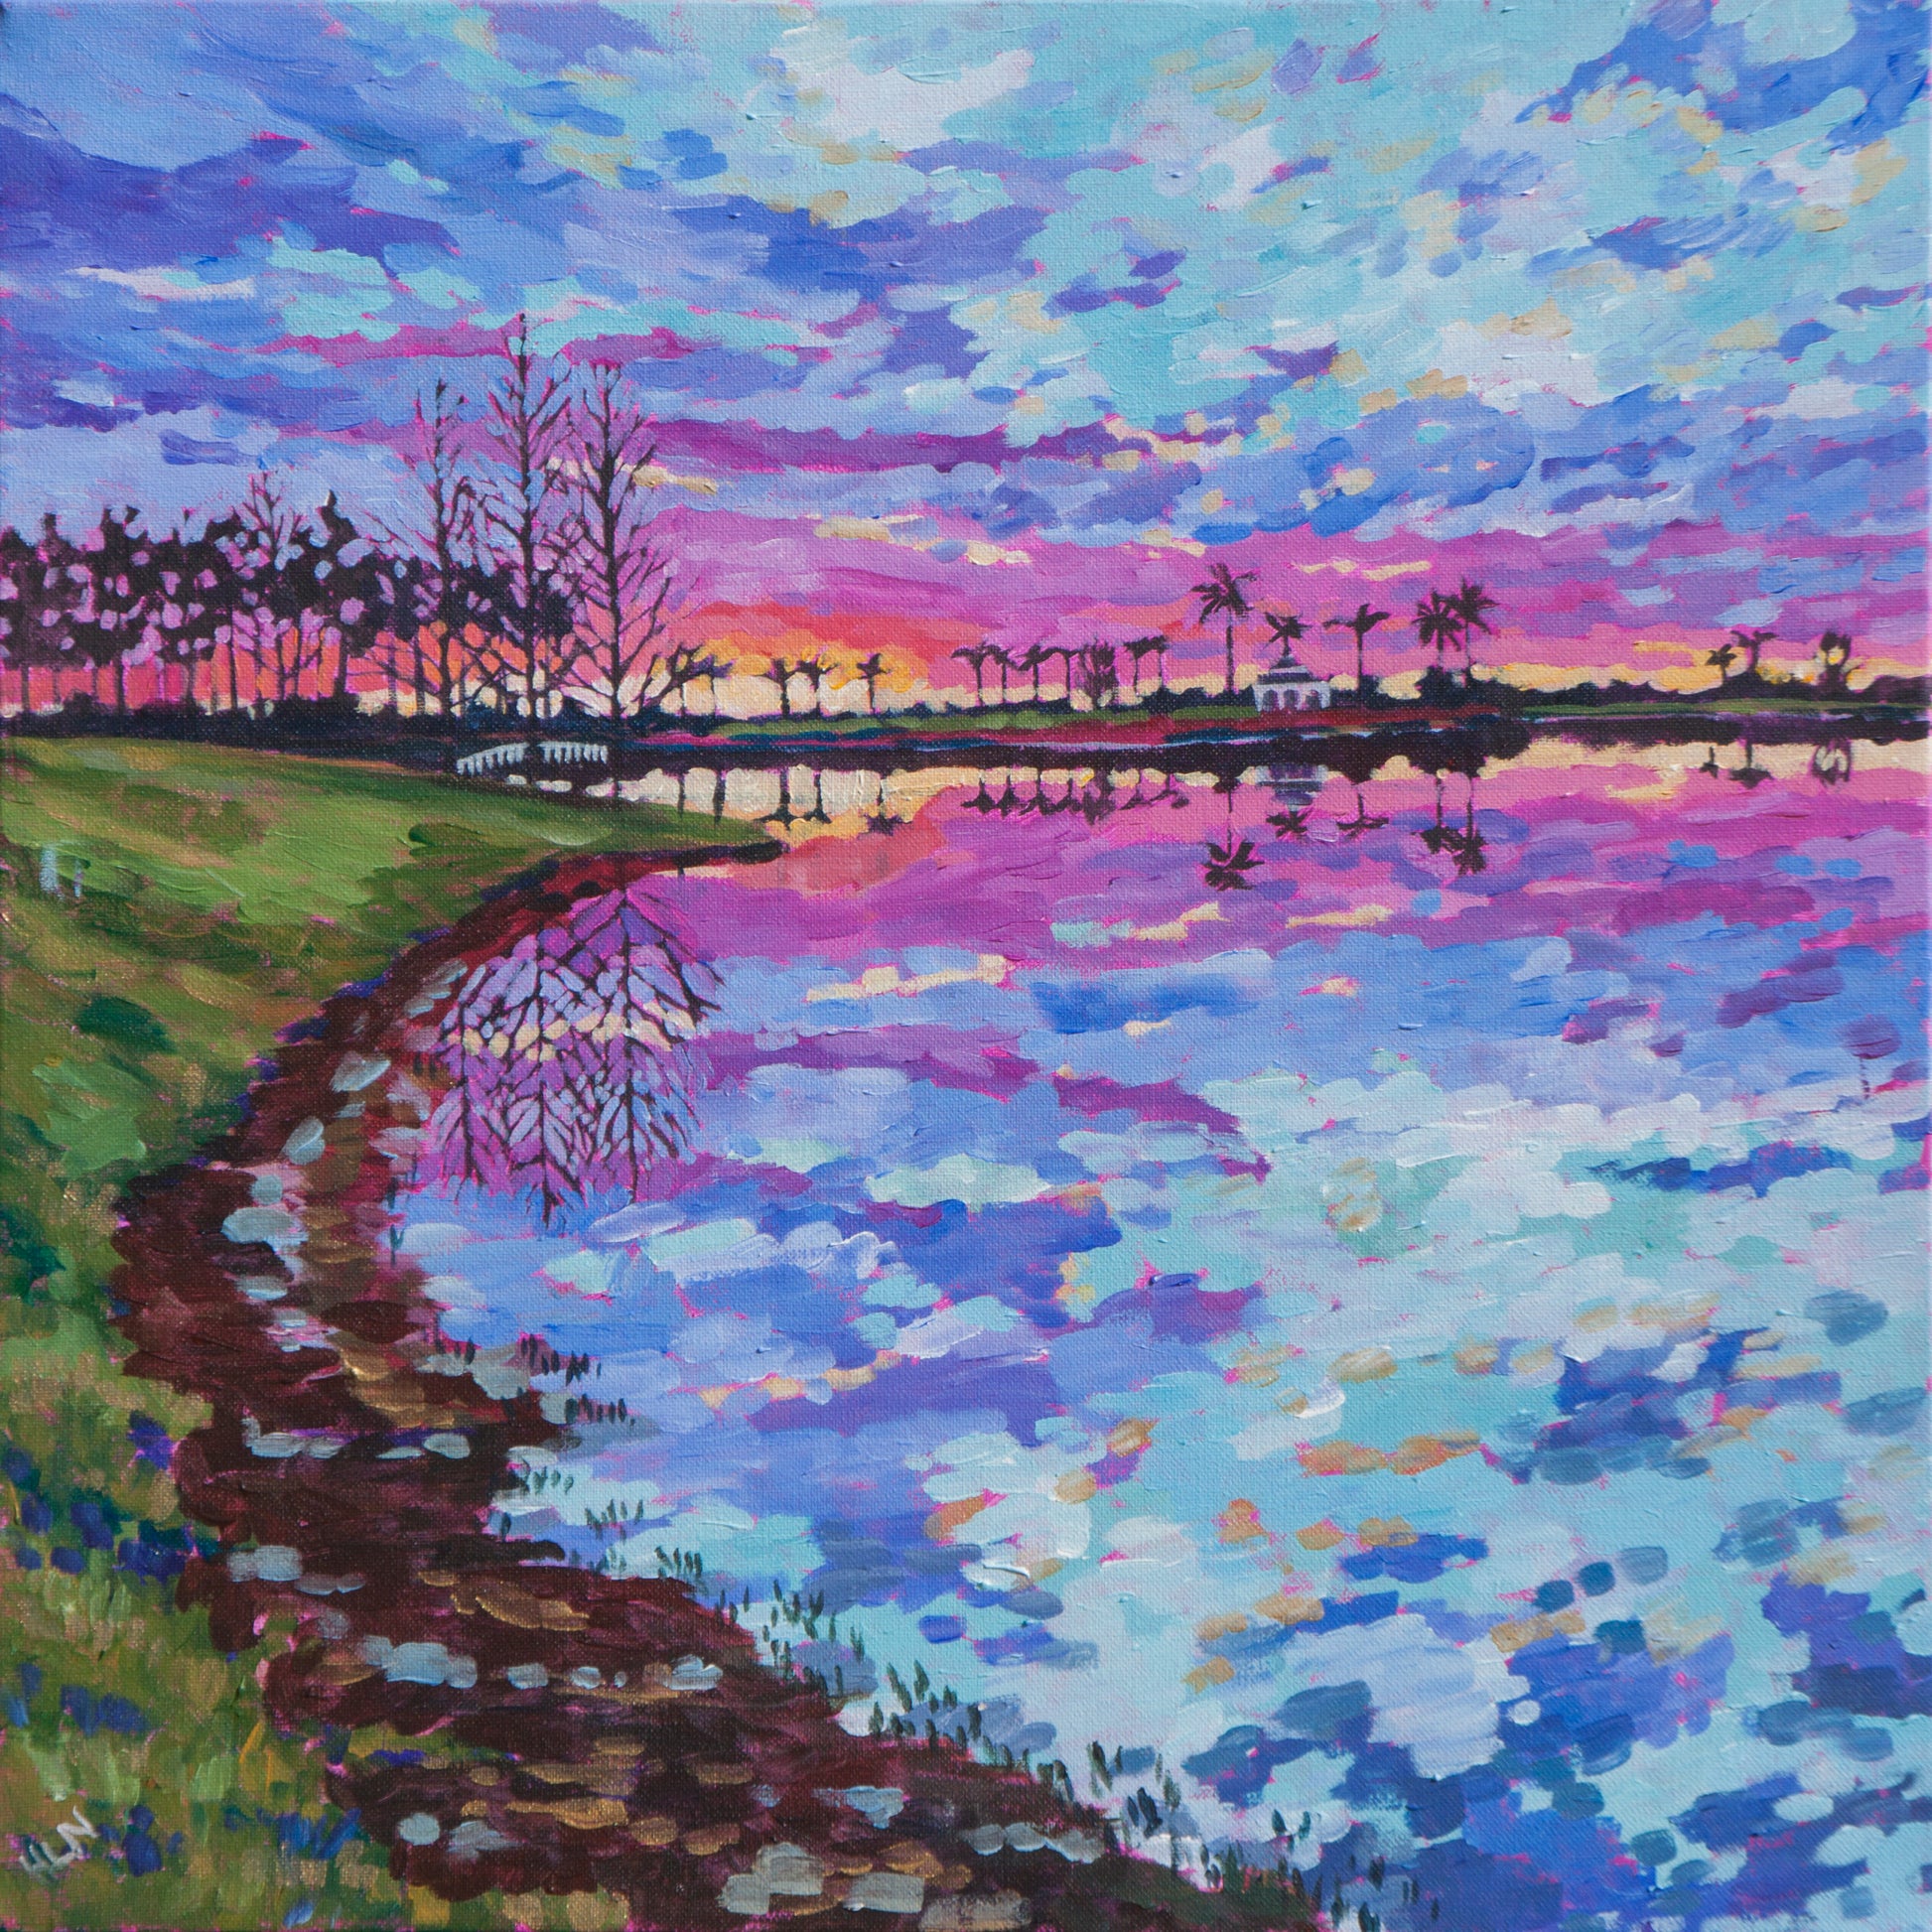 Rainbow colors painting of sunrise with dramatic sky and reflections in water